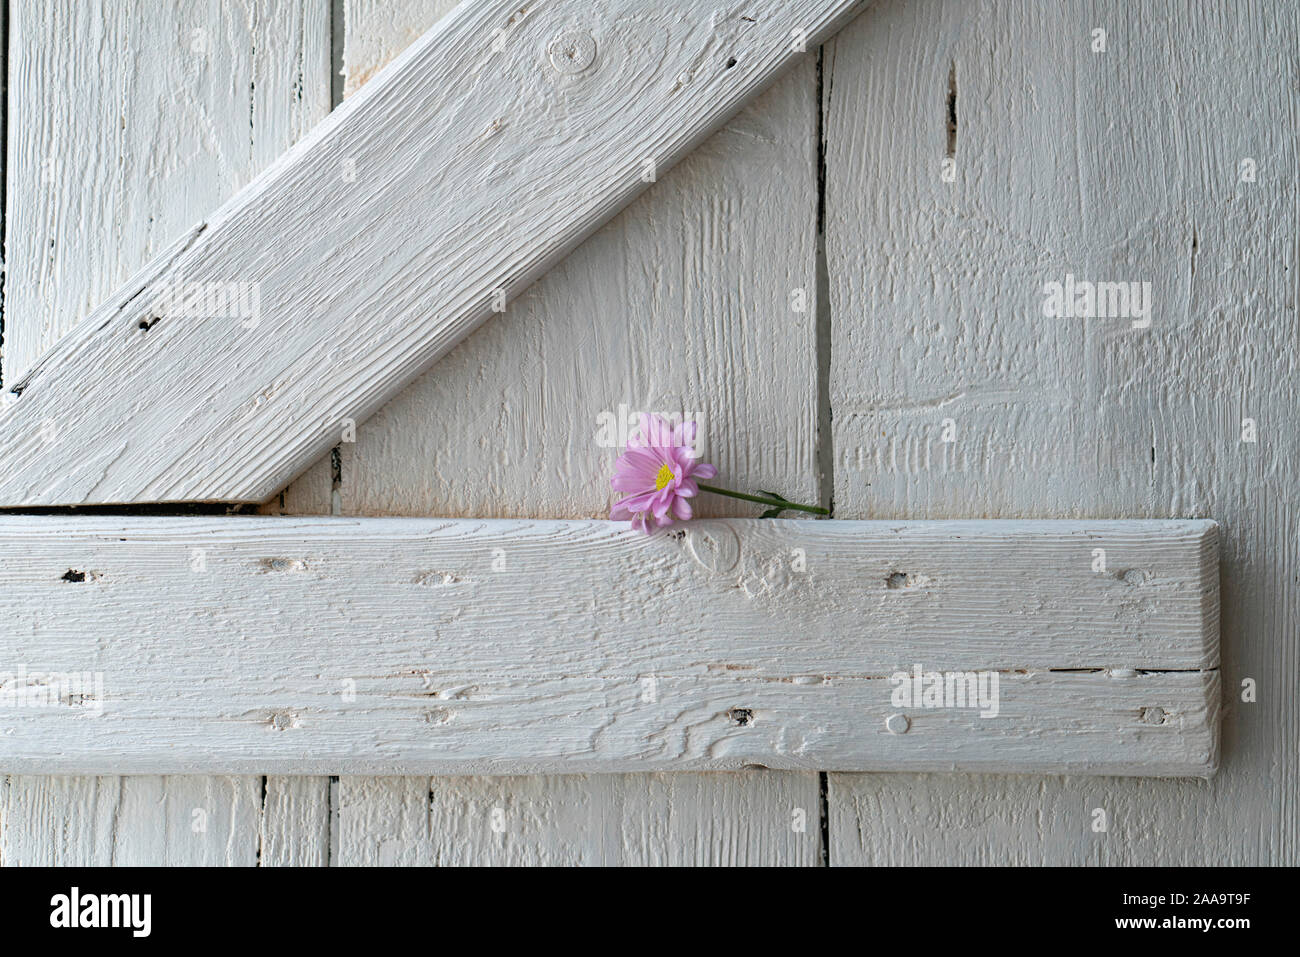 Beautiful wooden element with pink summer flower Stock Photo